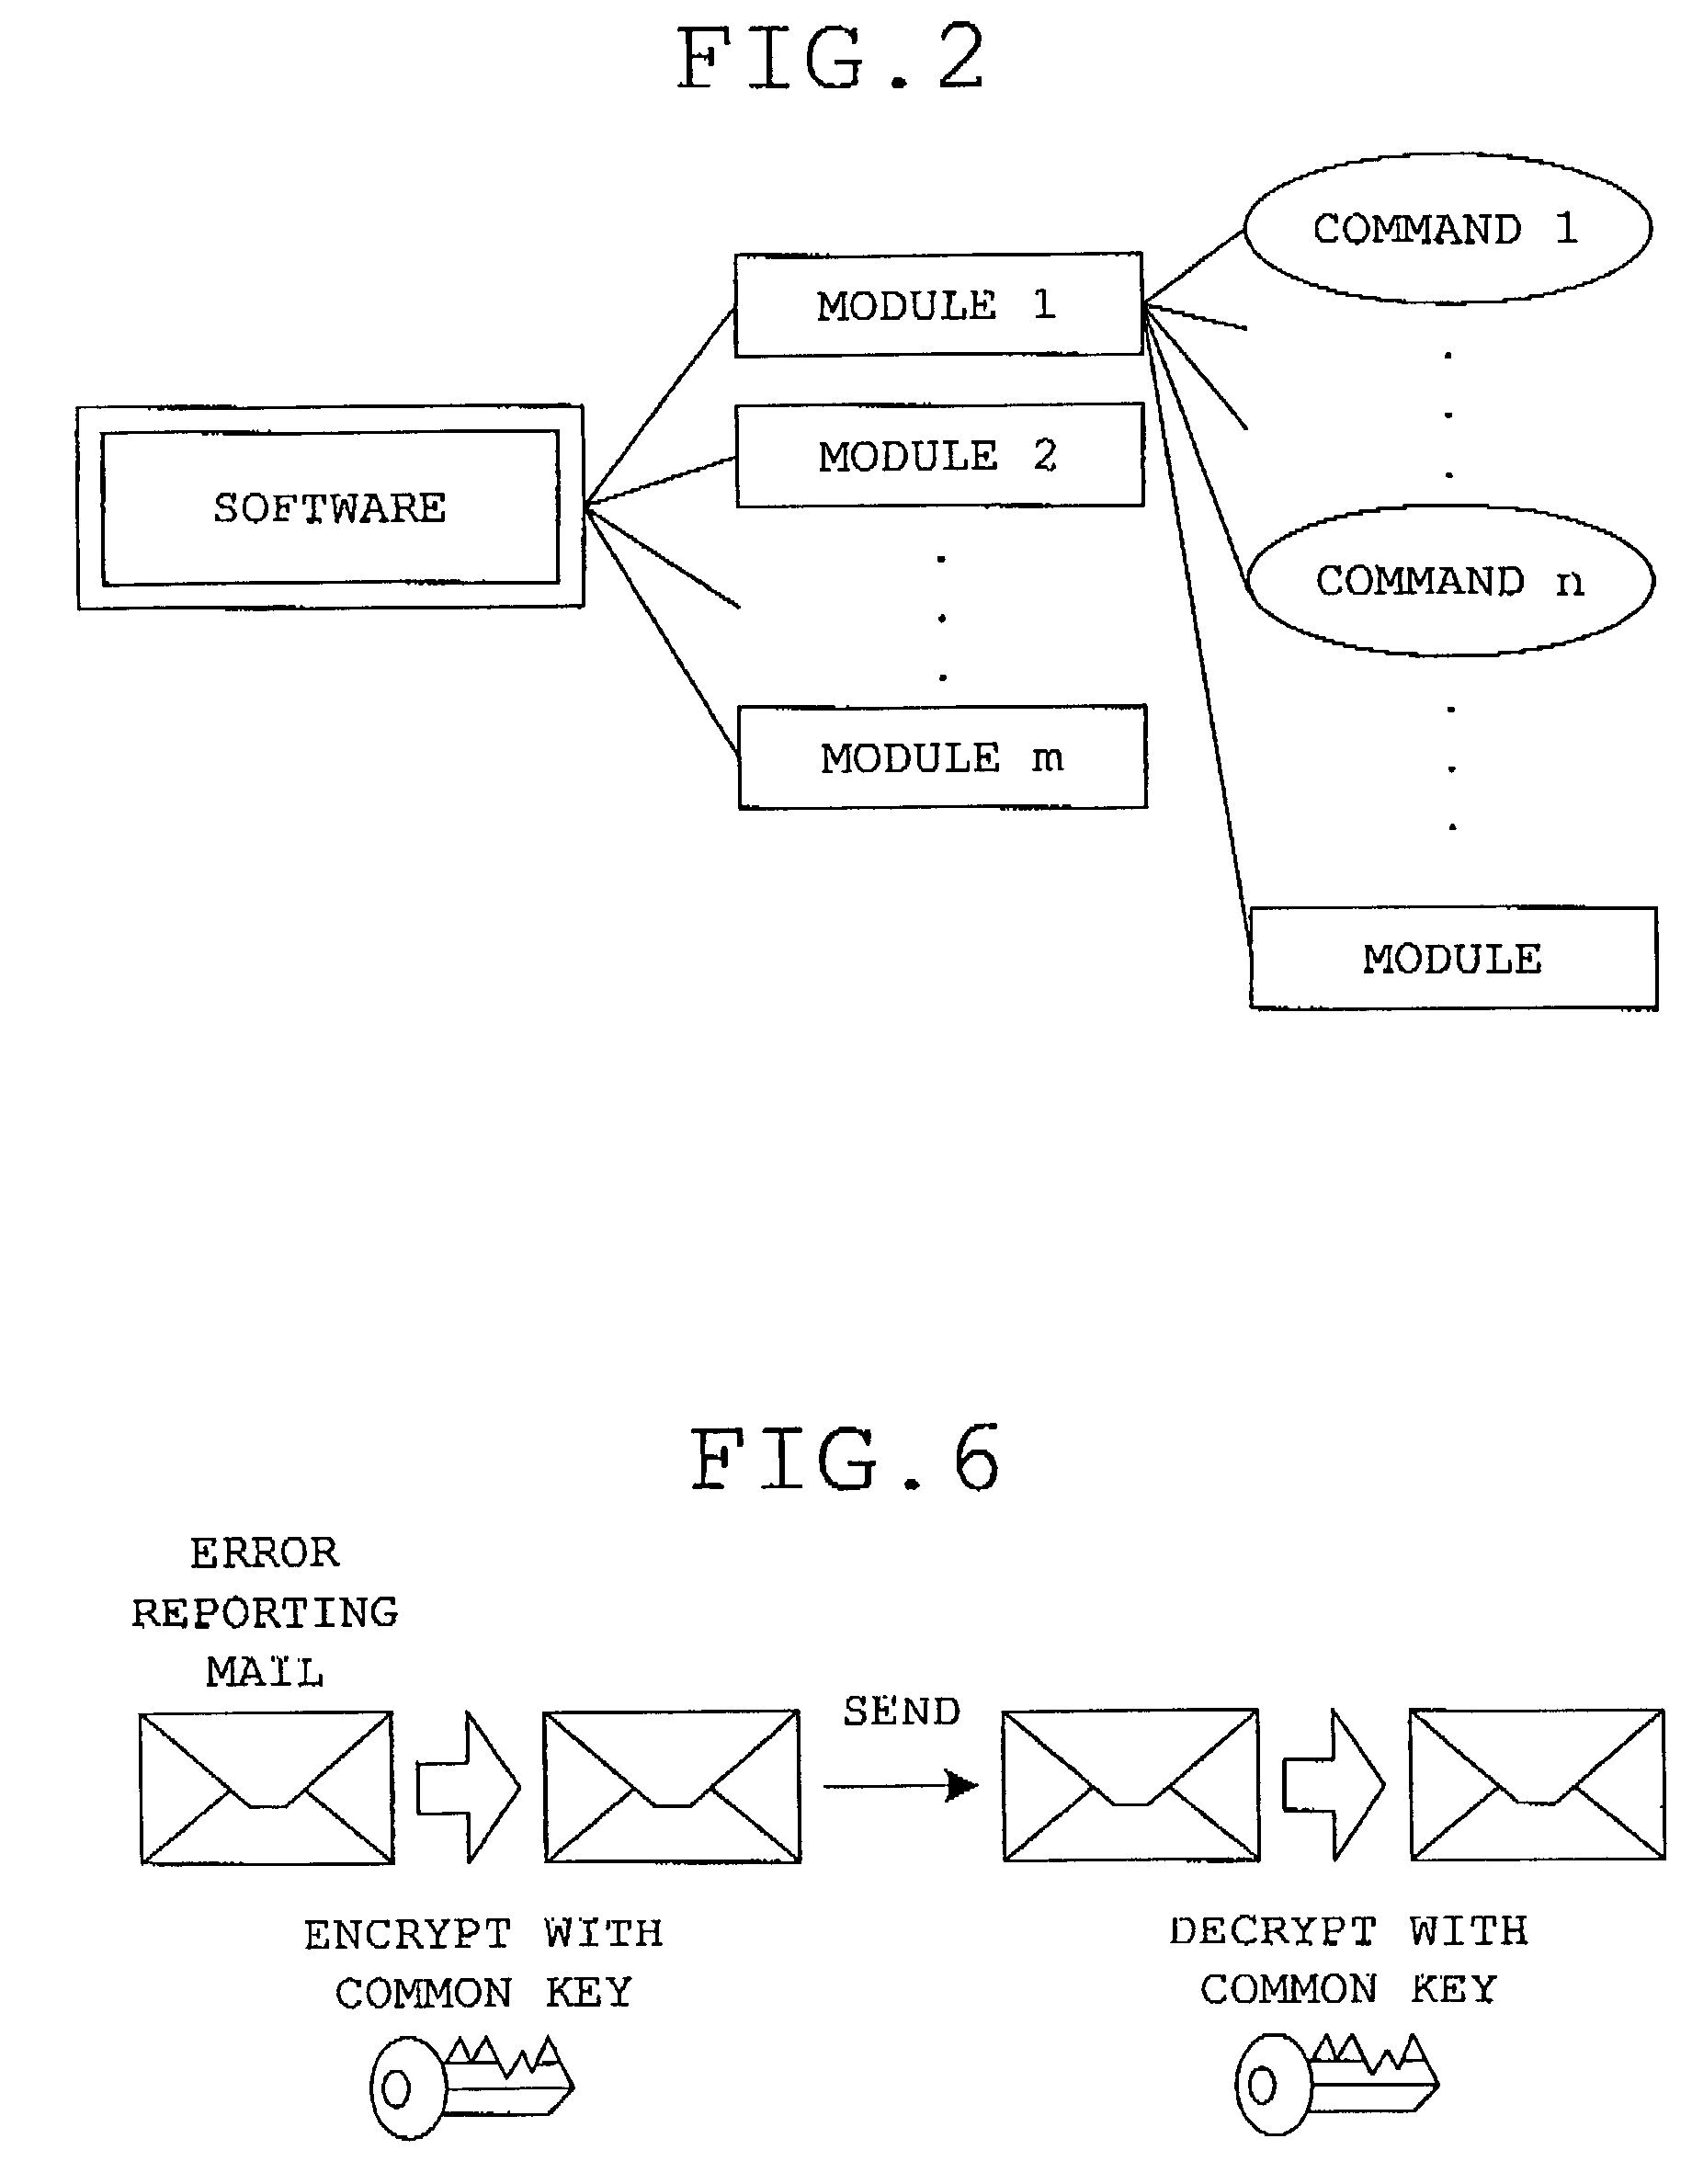 Software evaluation system having source code and function unit identification information in stored administration information